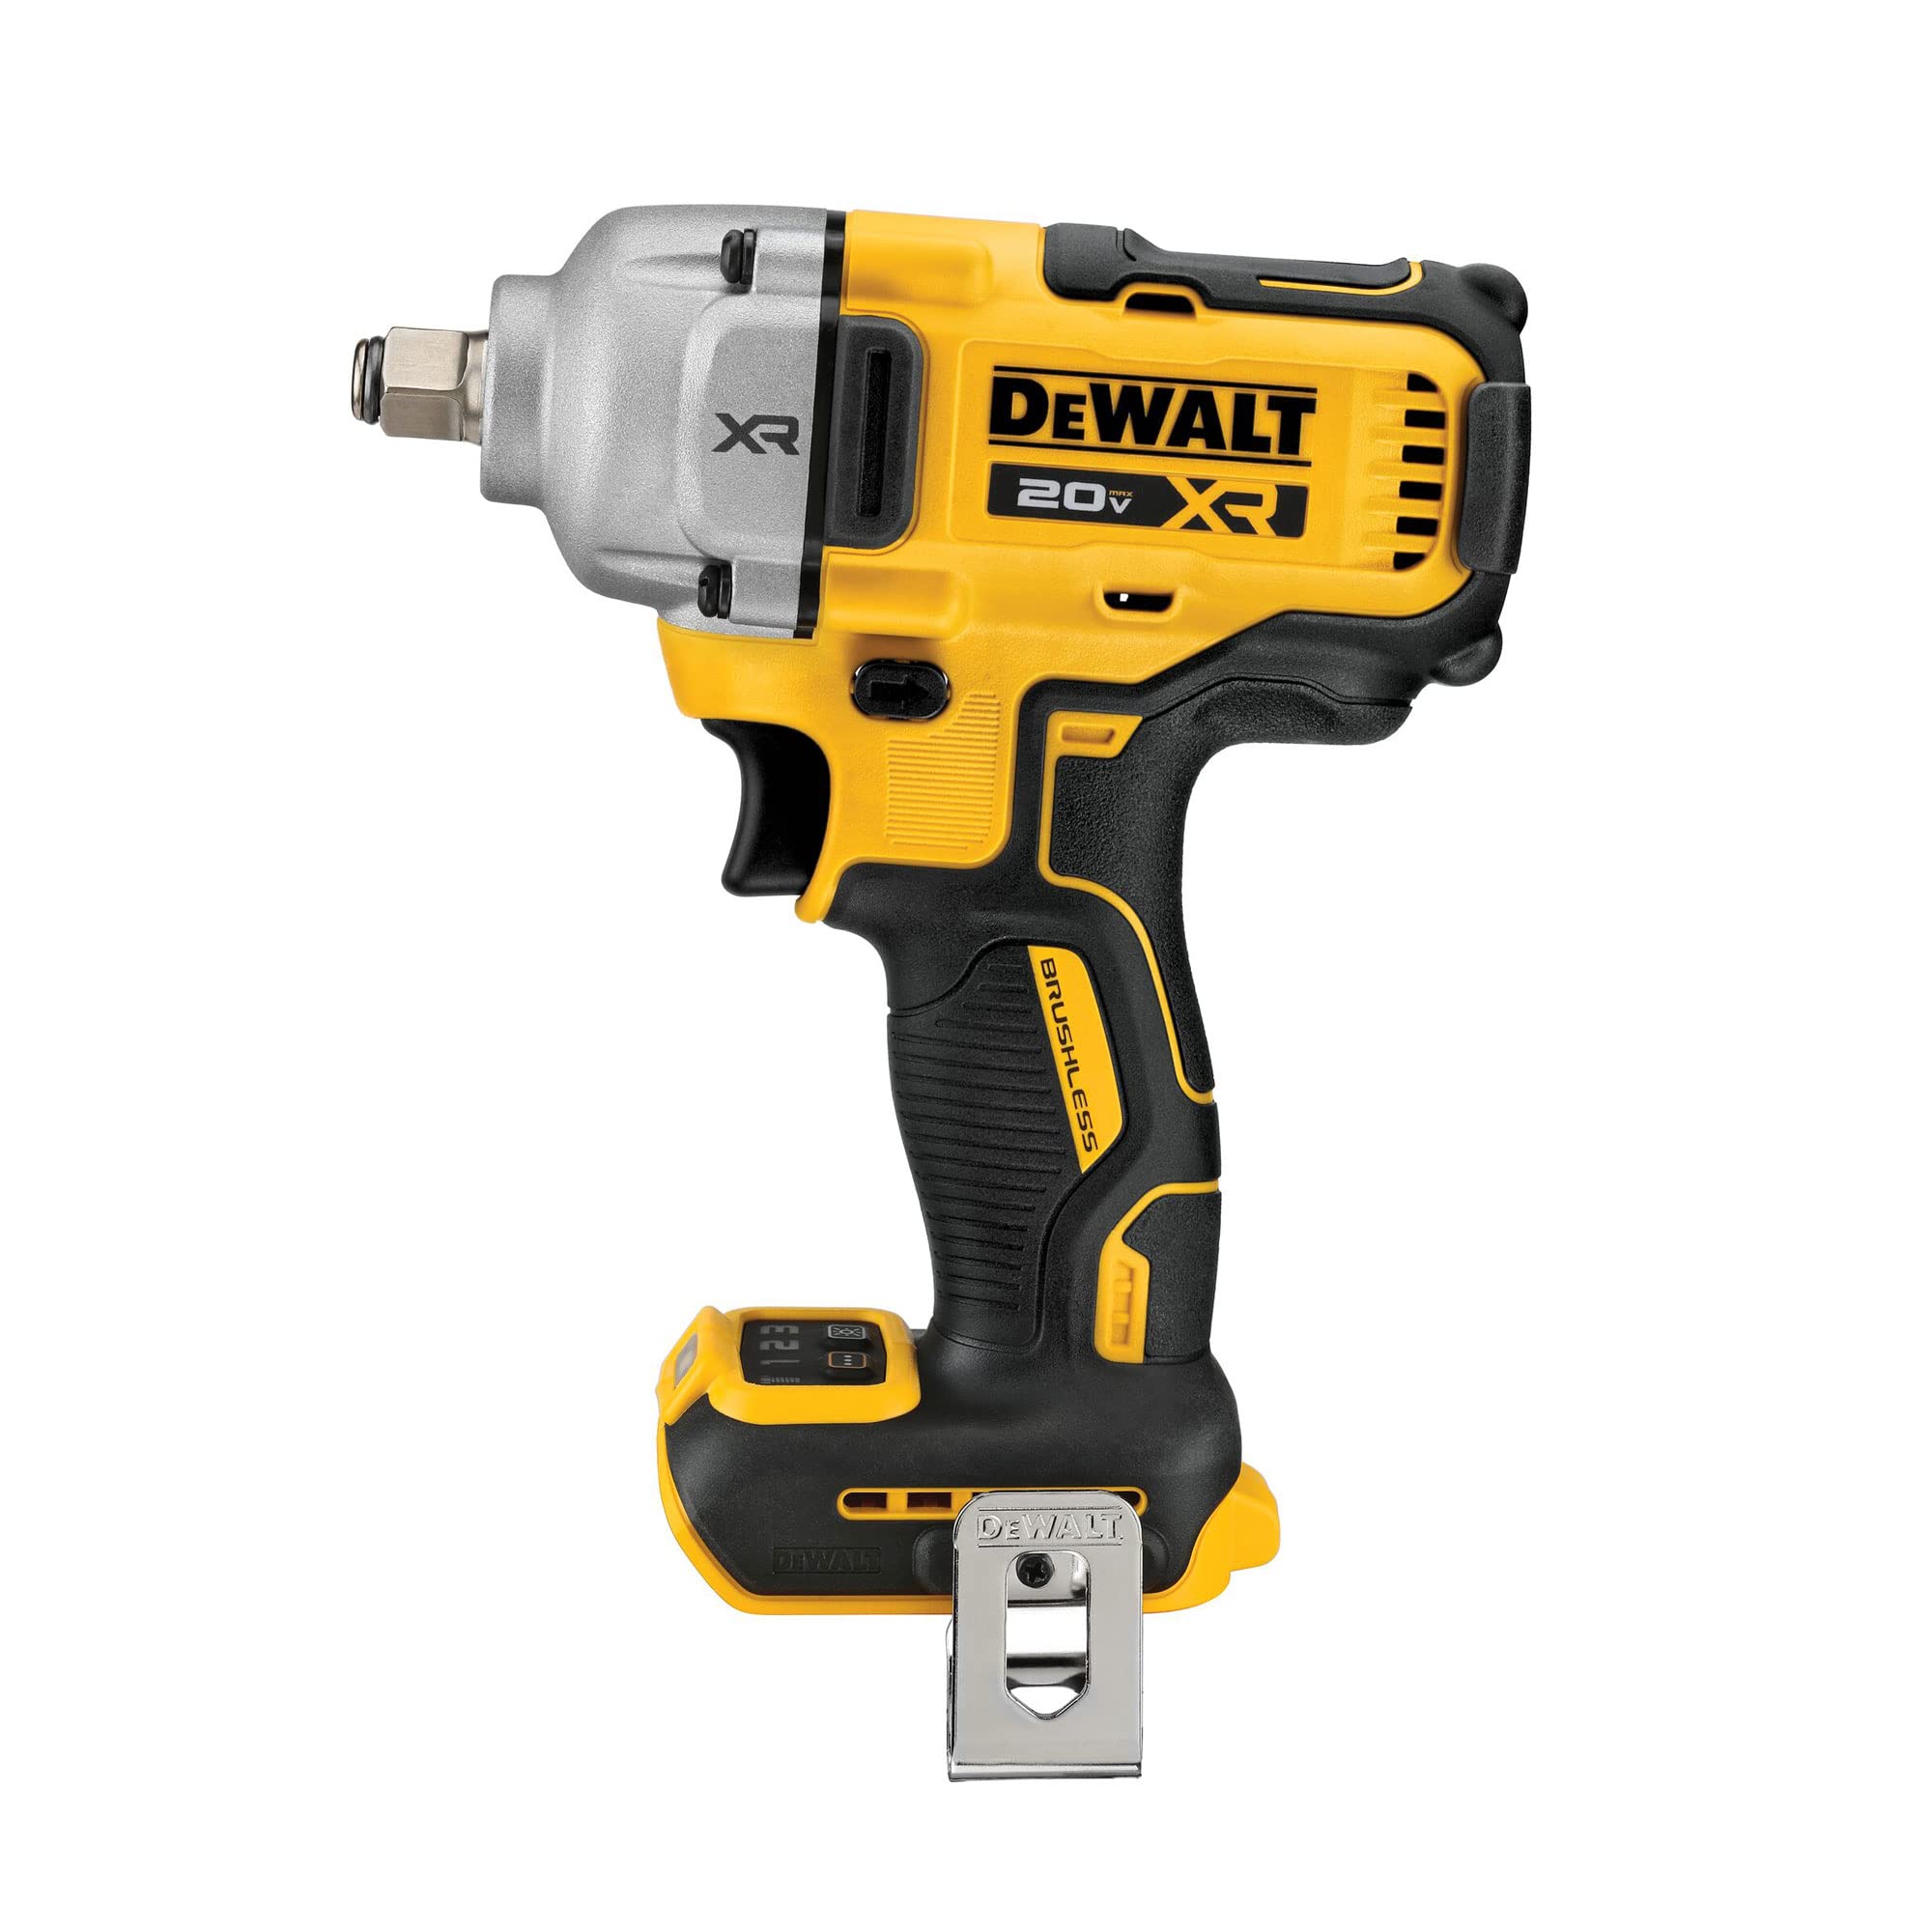 **Price Drop** 20V Dewalt Max Cordless Impact Wrench 1/2" Hog Ring w/ LED Work Light & Belt Clip (Bare Tool Only) $175.50 + Free Shipping